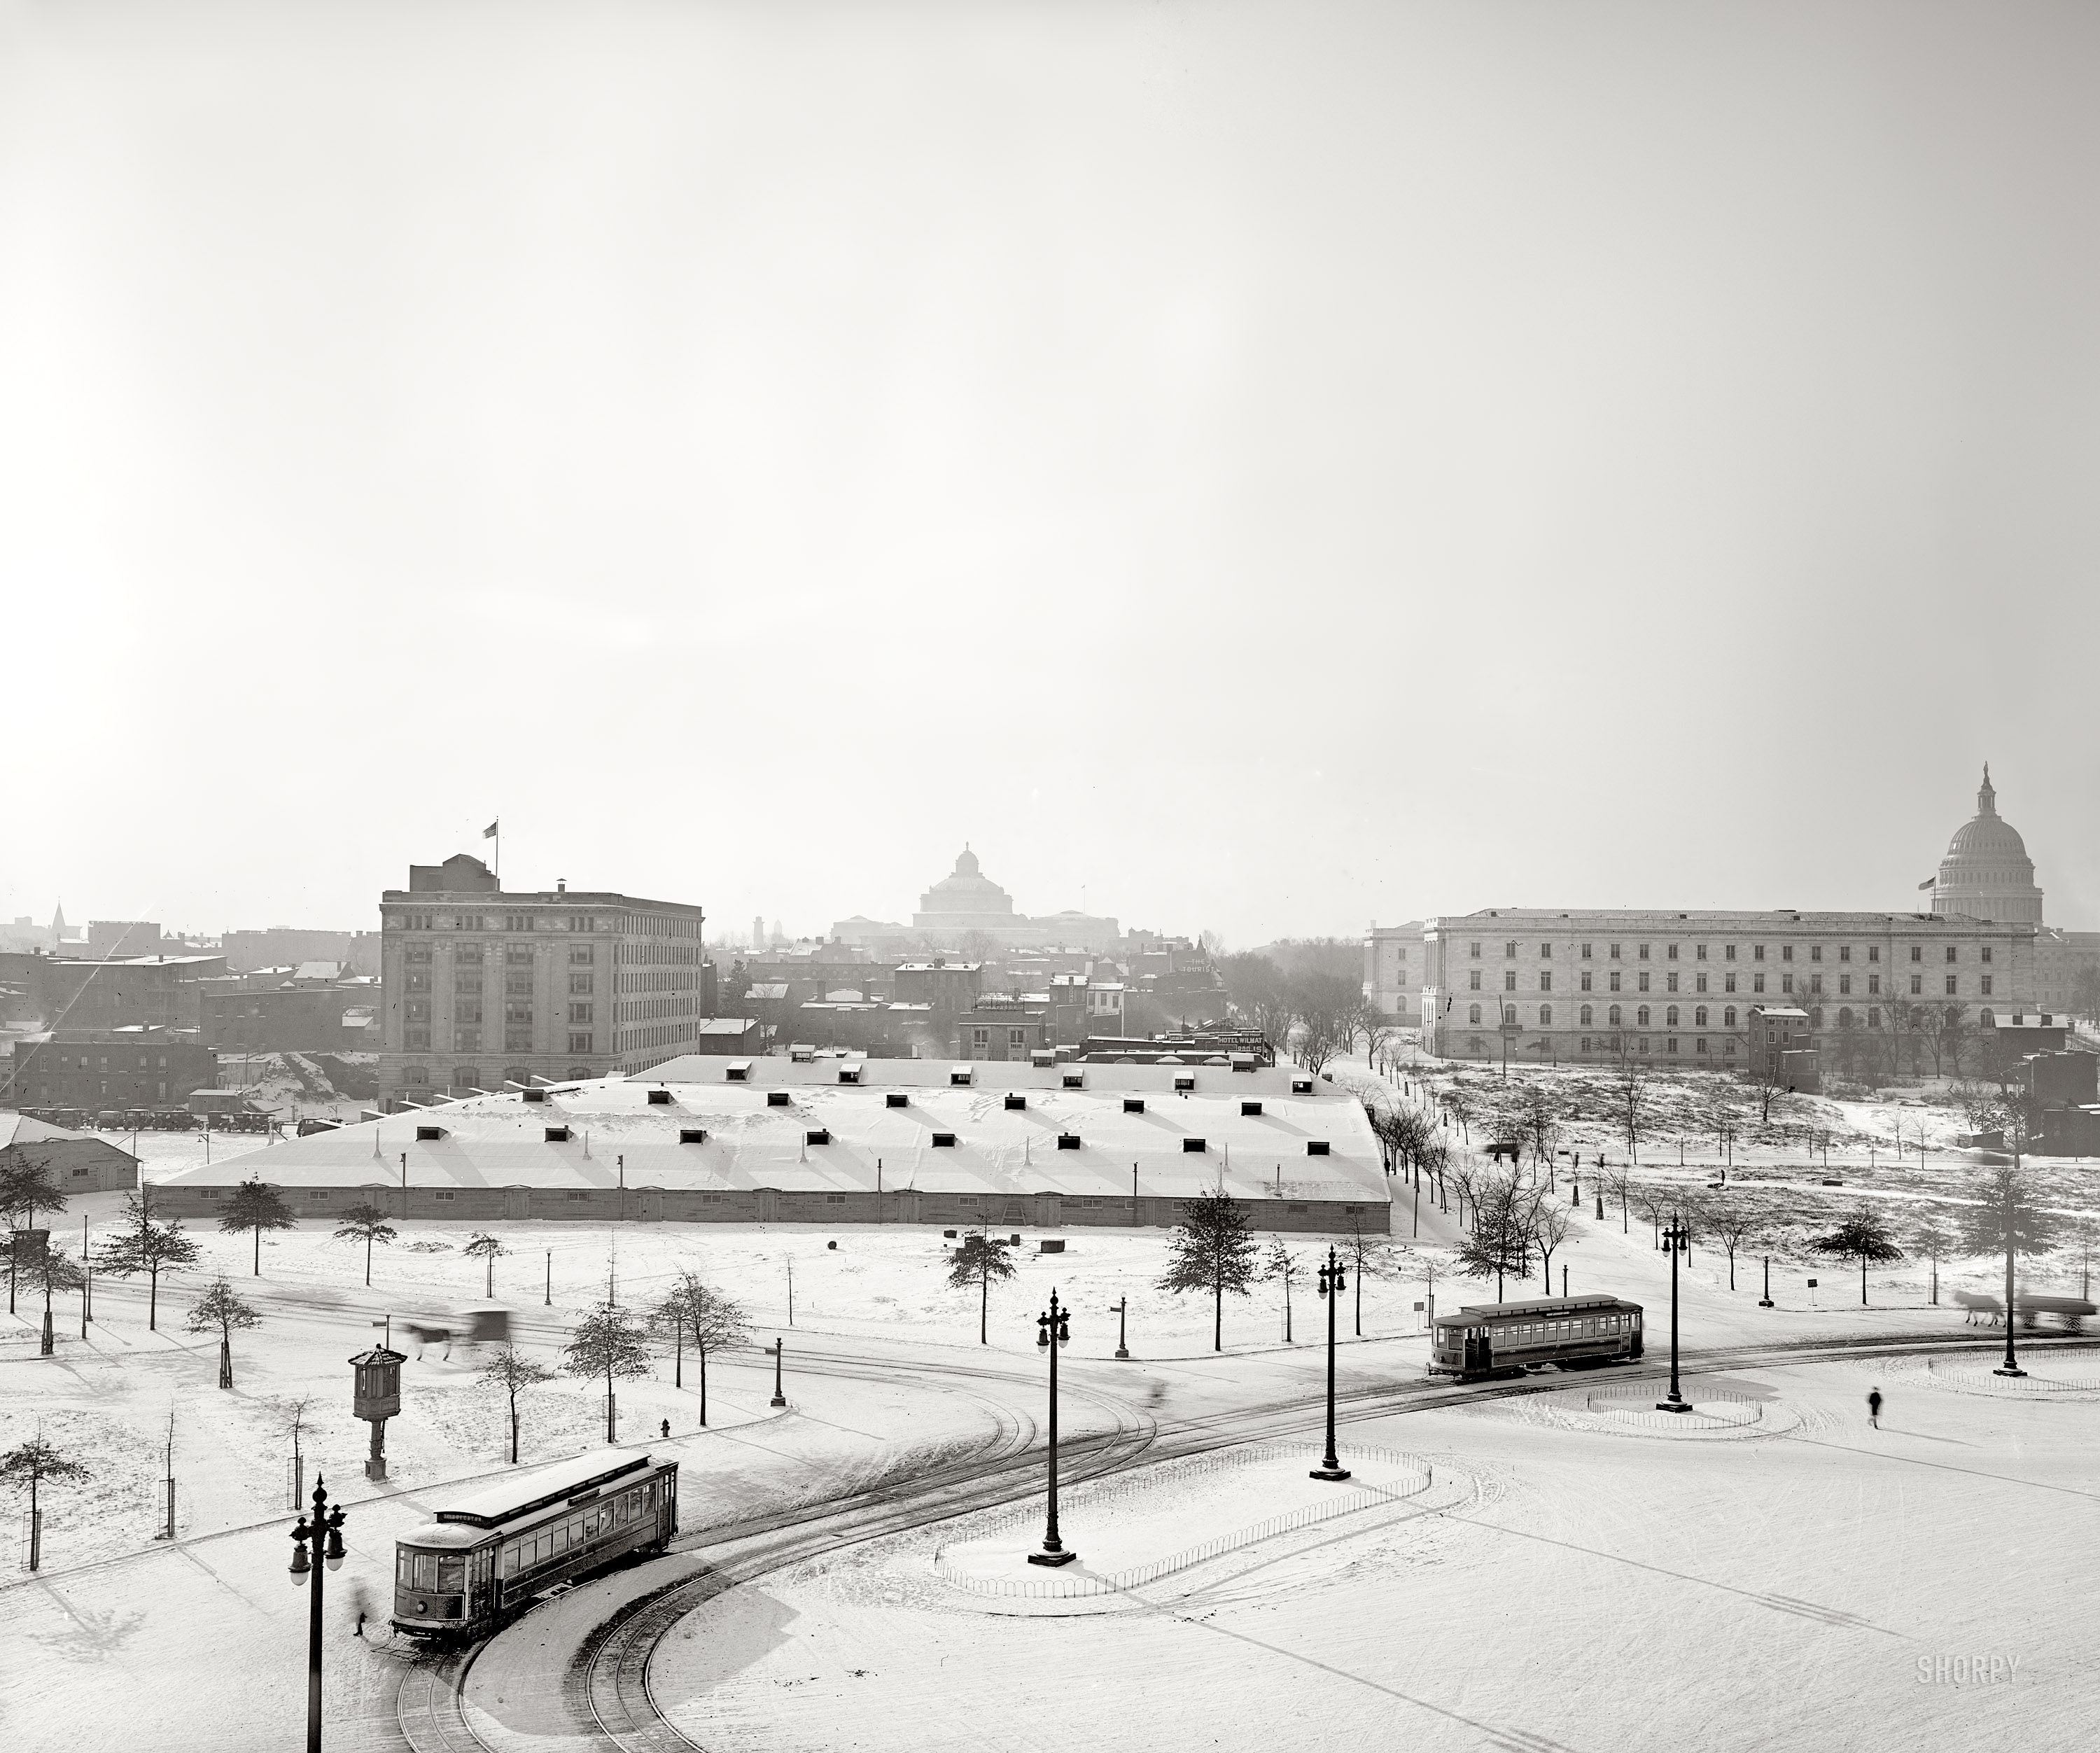 January 1918. Washington, D.C. "Billy Sunday tabernacle." A temporary meeting hall built near Union Station for a three-month series of revival meetings held by the famous evangelist. Harris & Ewing Collection glass negative. View full size.